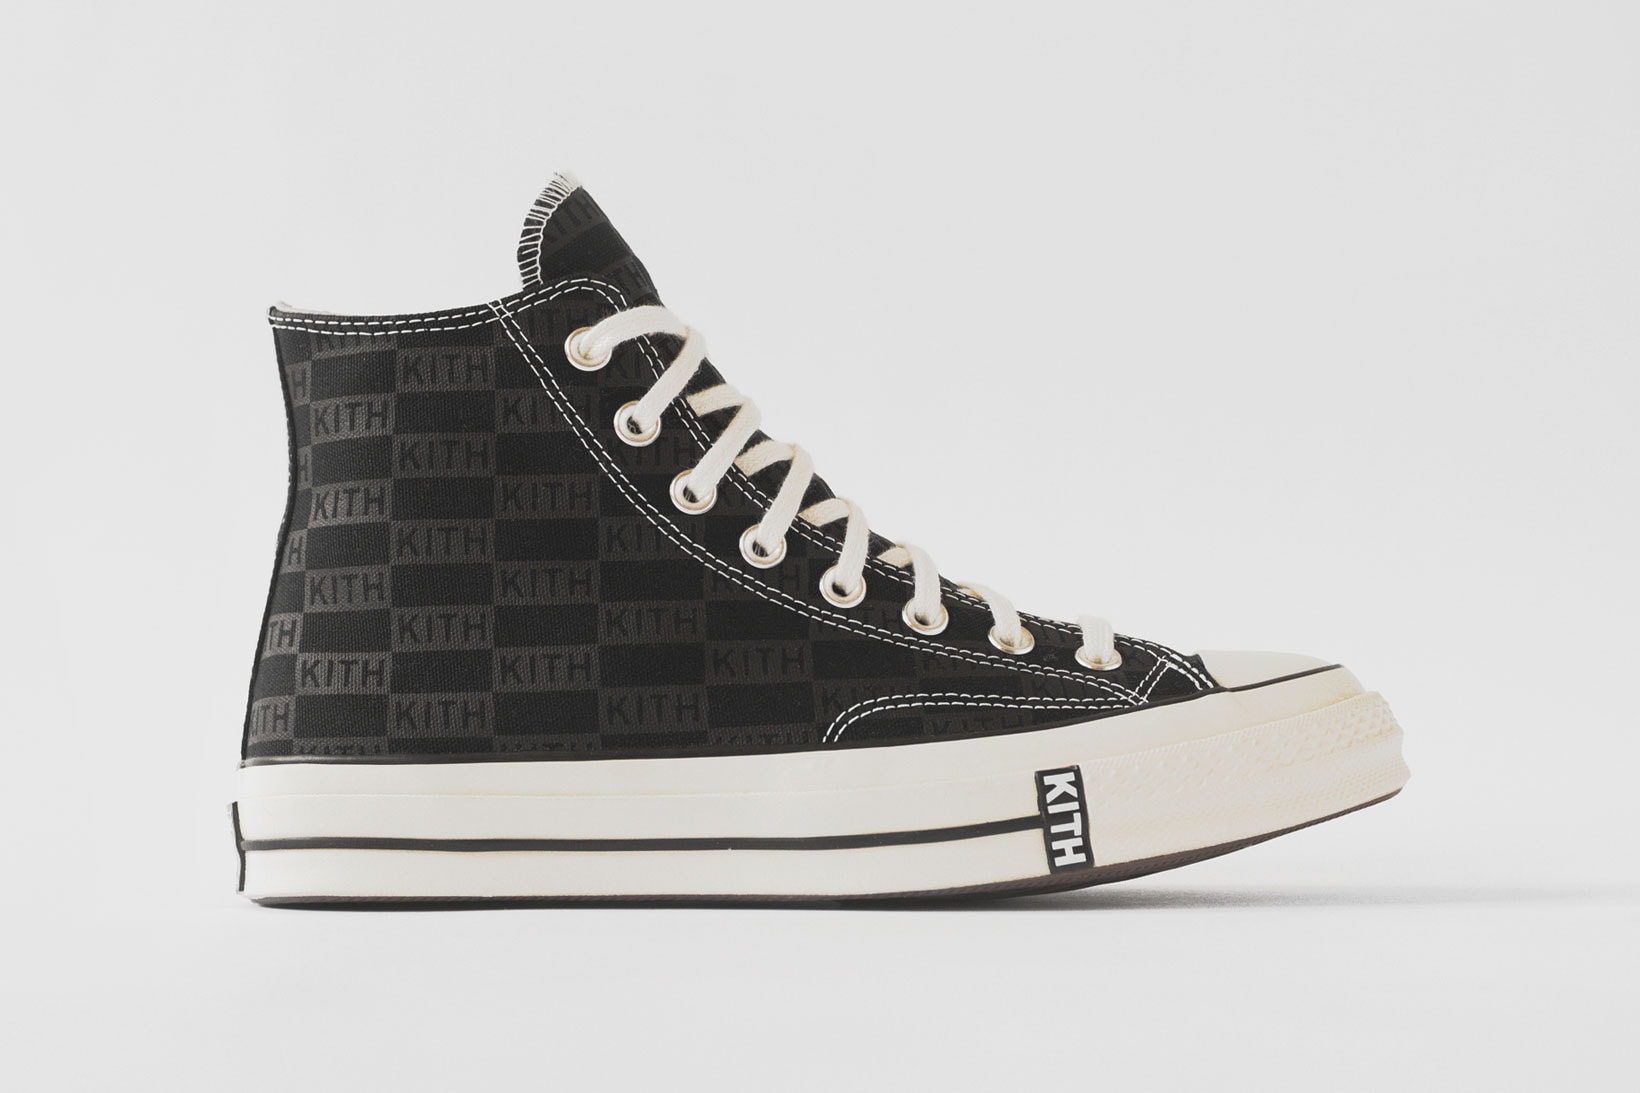 KITH Converse Chuck Taylor All Star 1970 Black Parchment 